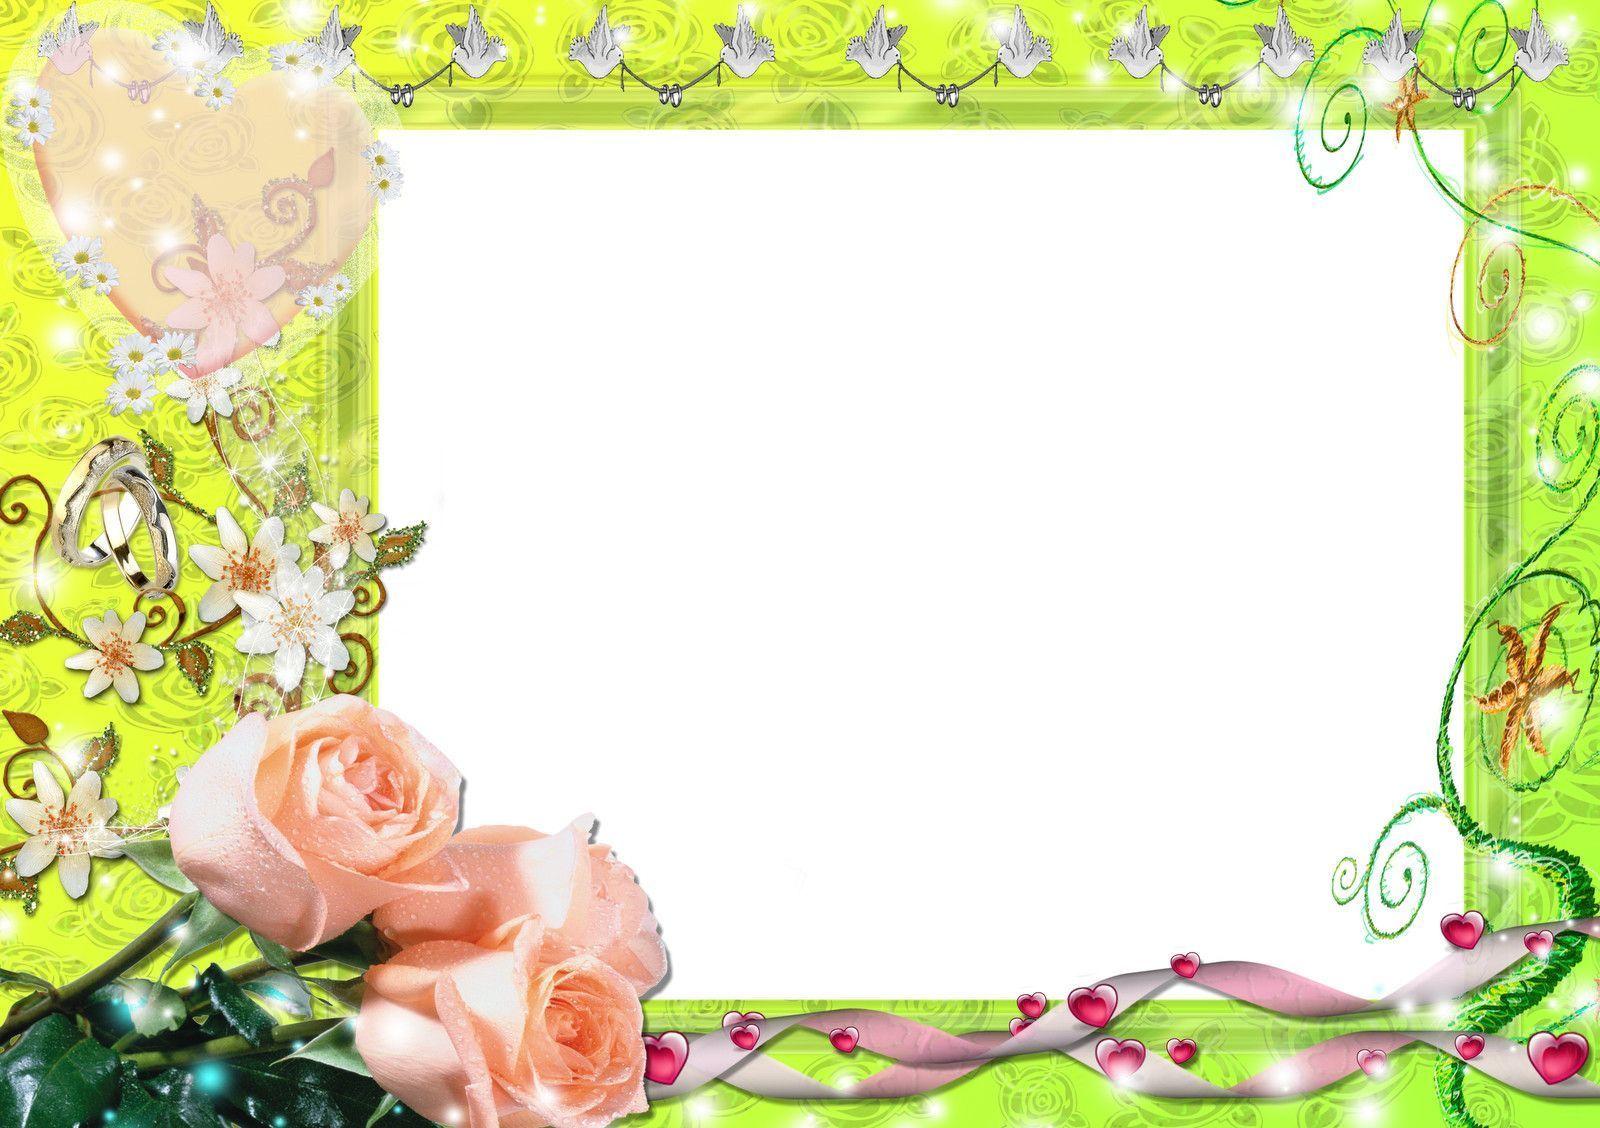 Free Border And Frame PowerPoint Background Wallpaper Download